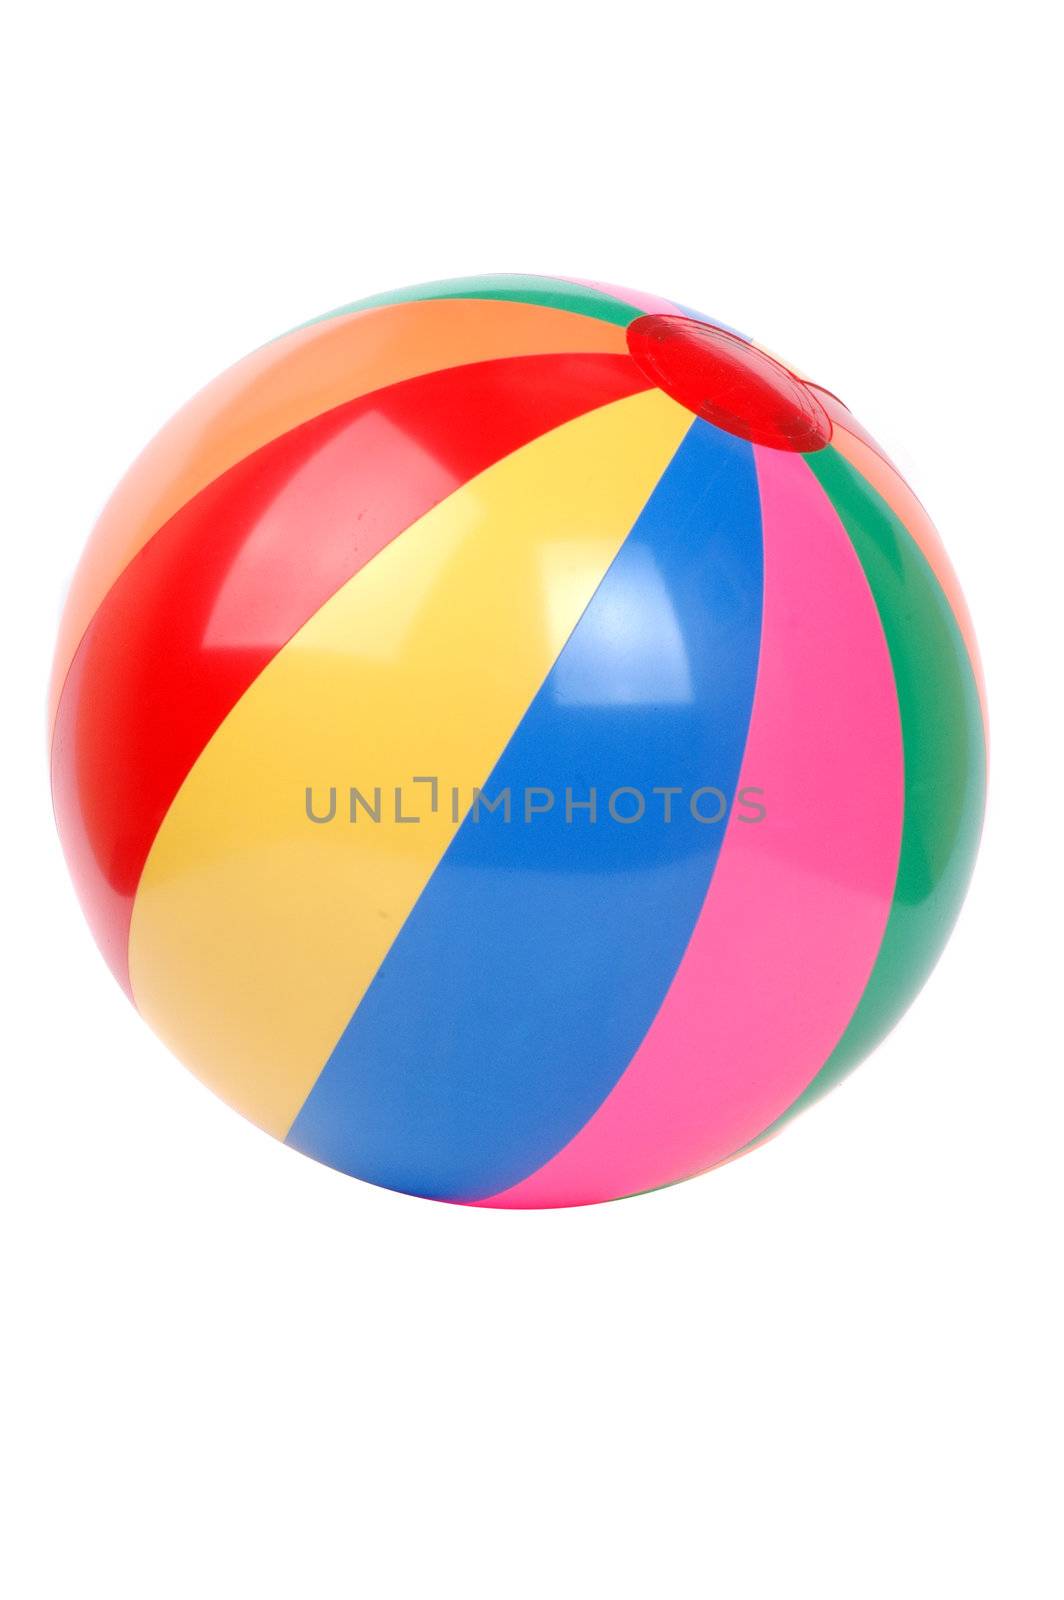 colorful plactic ball  by antonihalim